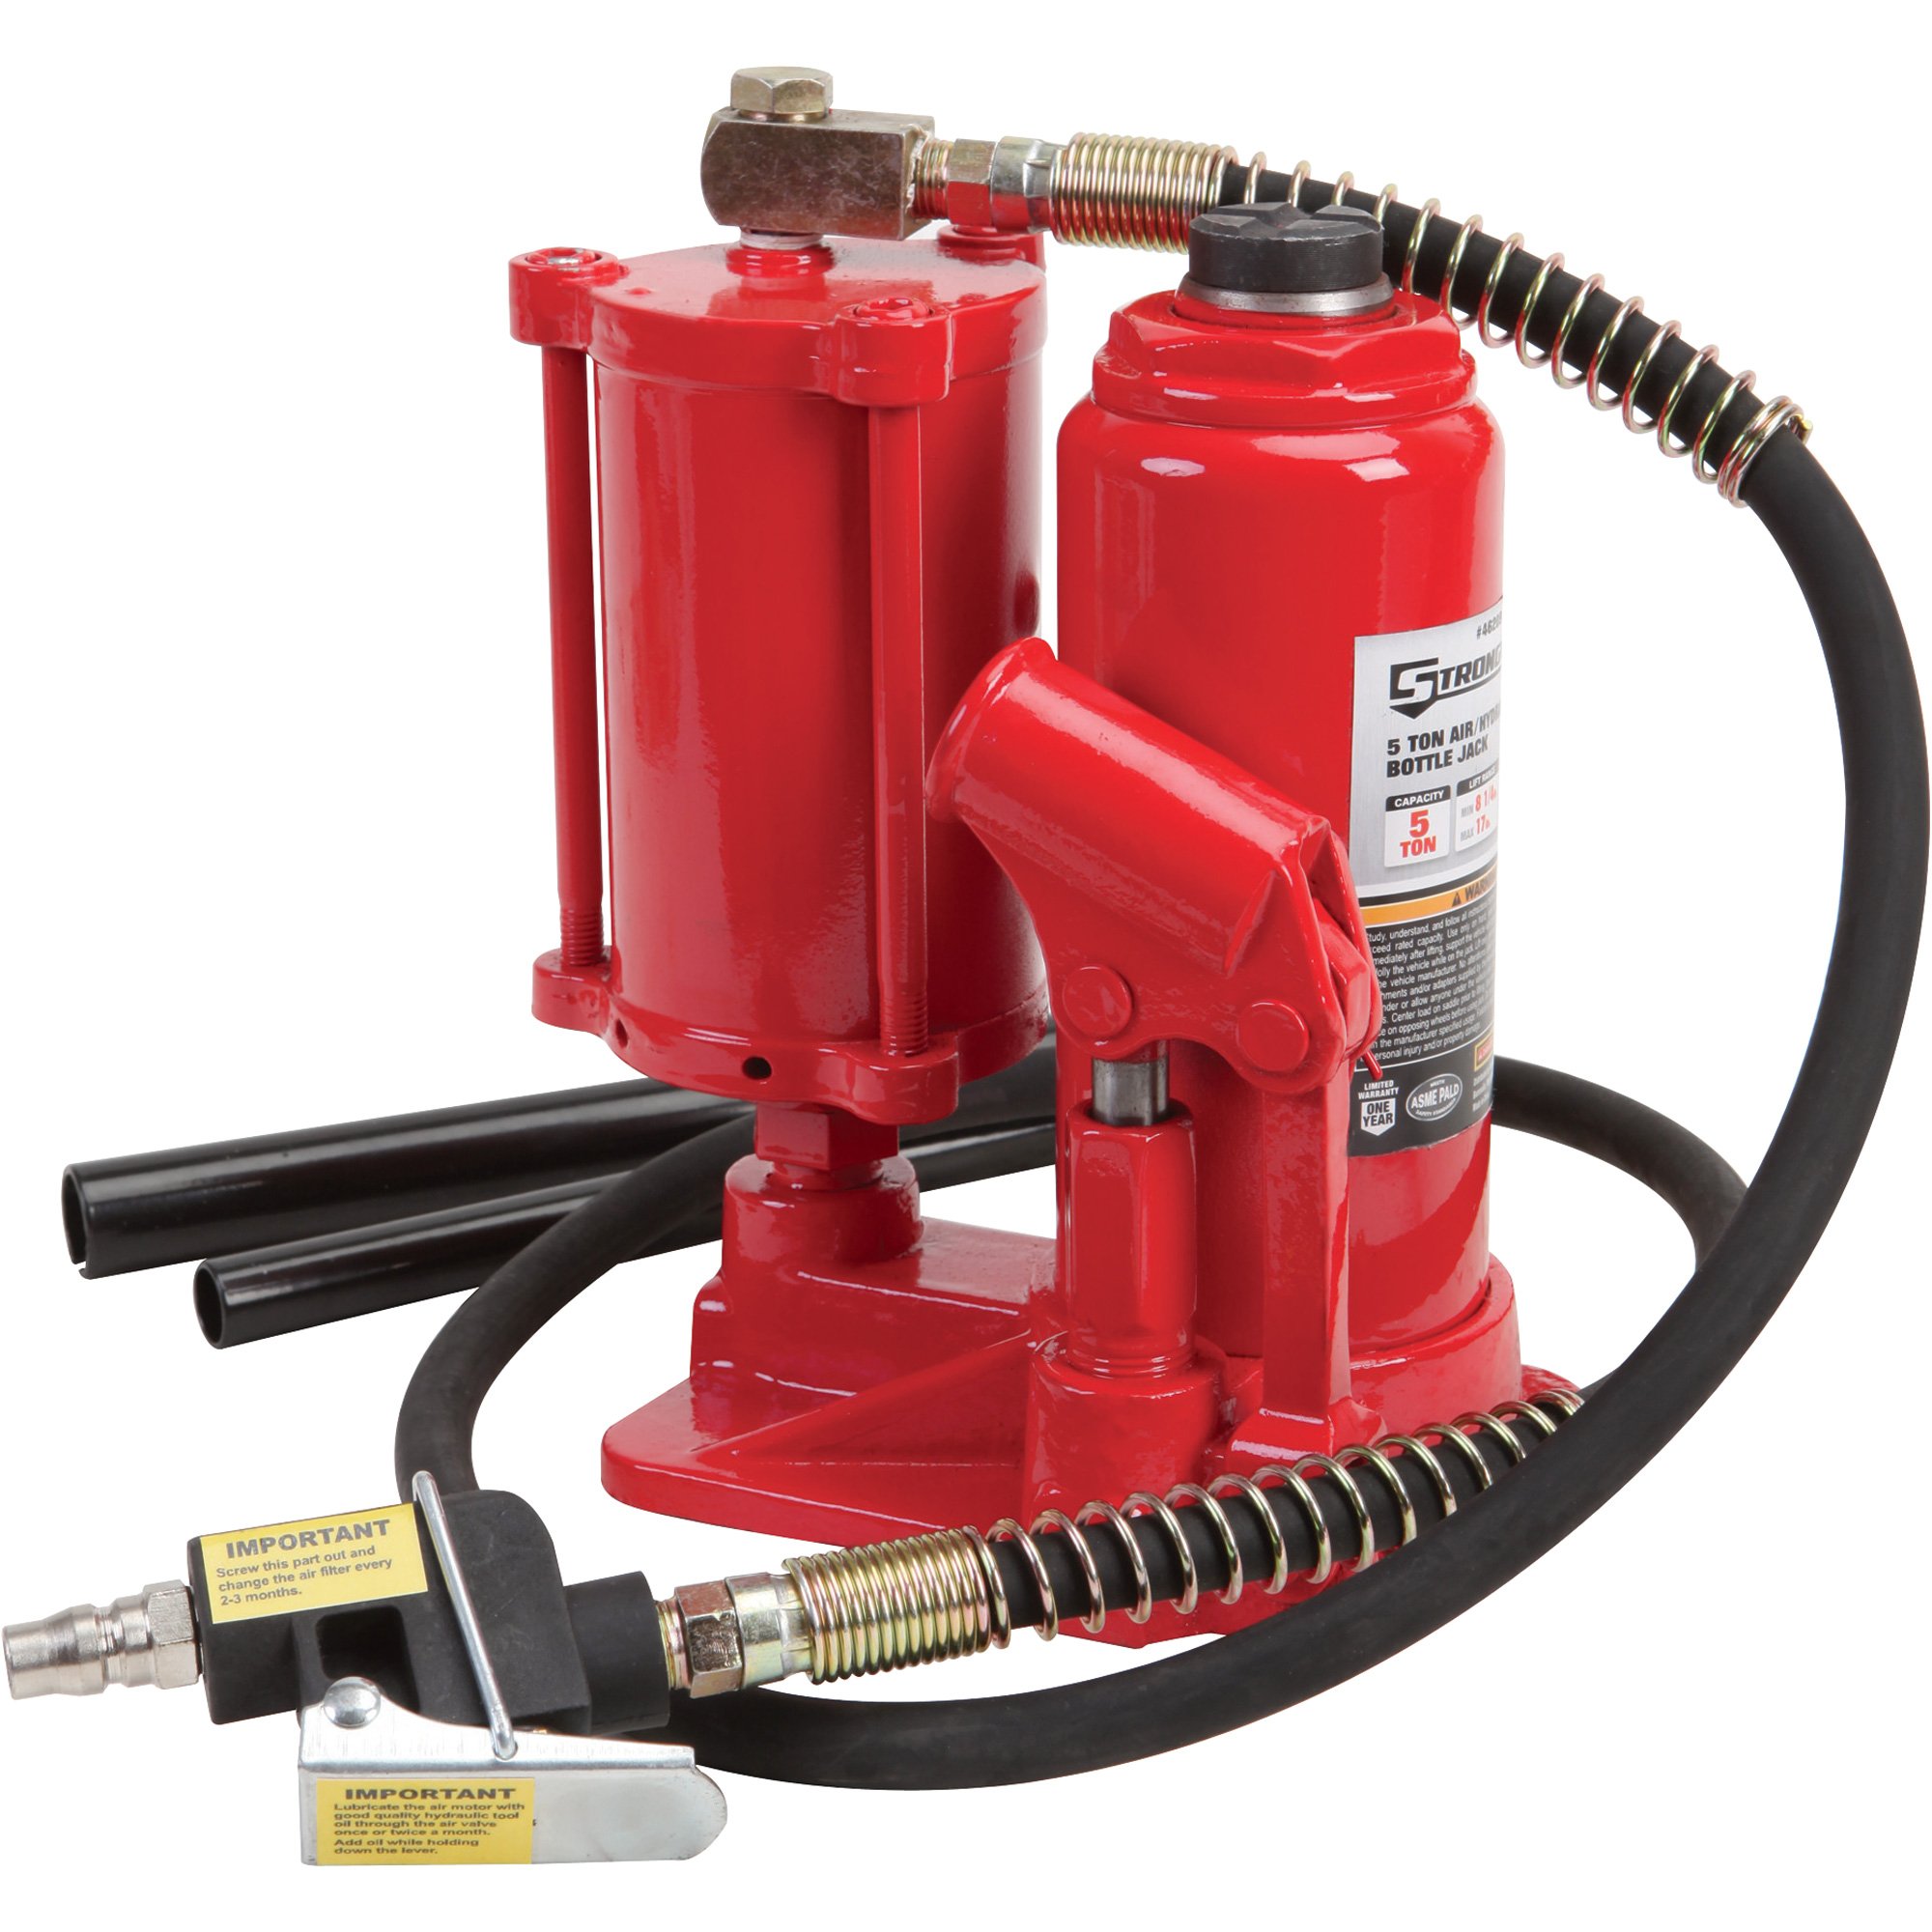 What Oil To Use On An Air Hydraulic Jack?